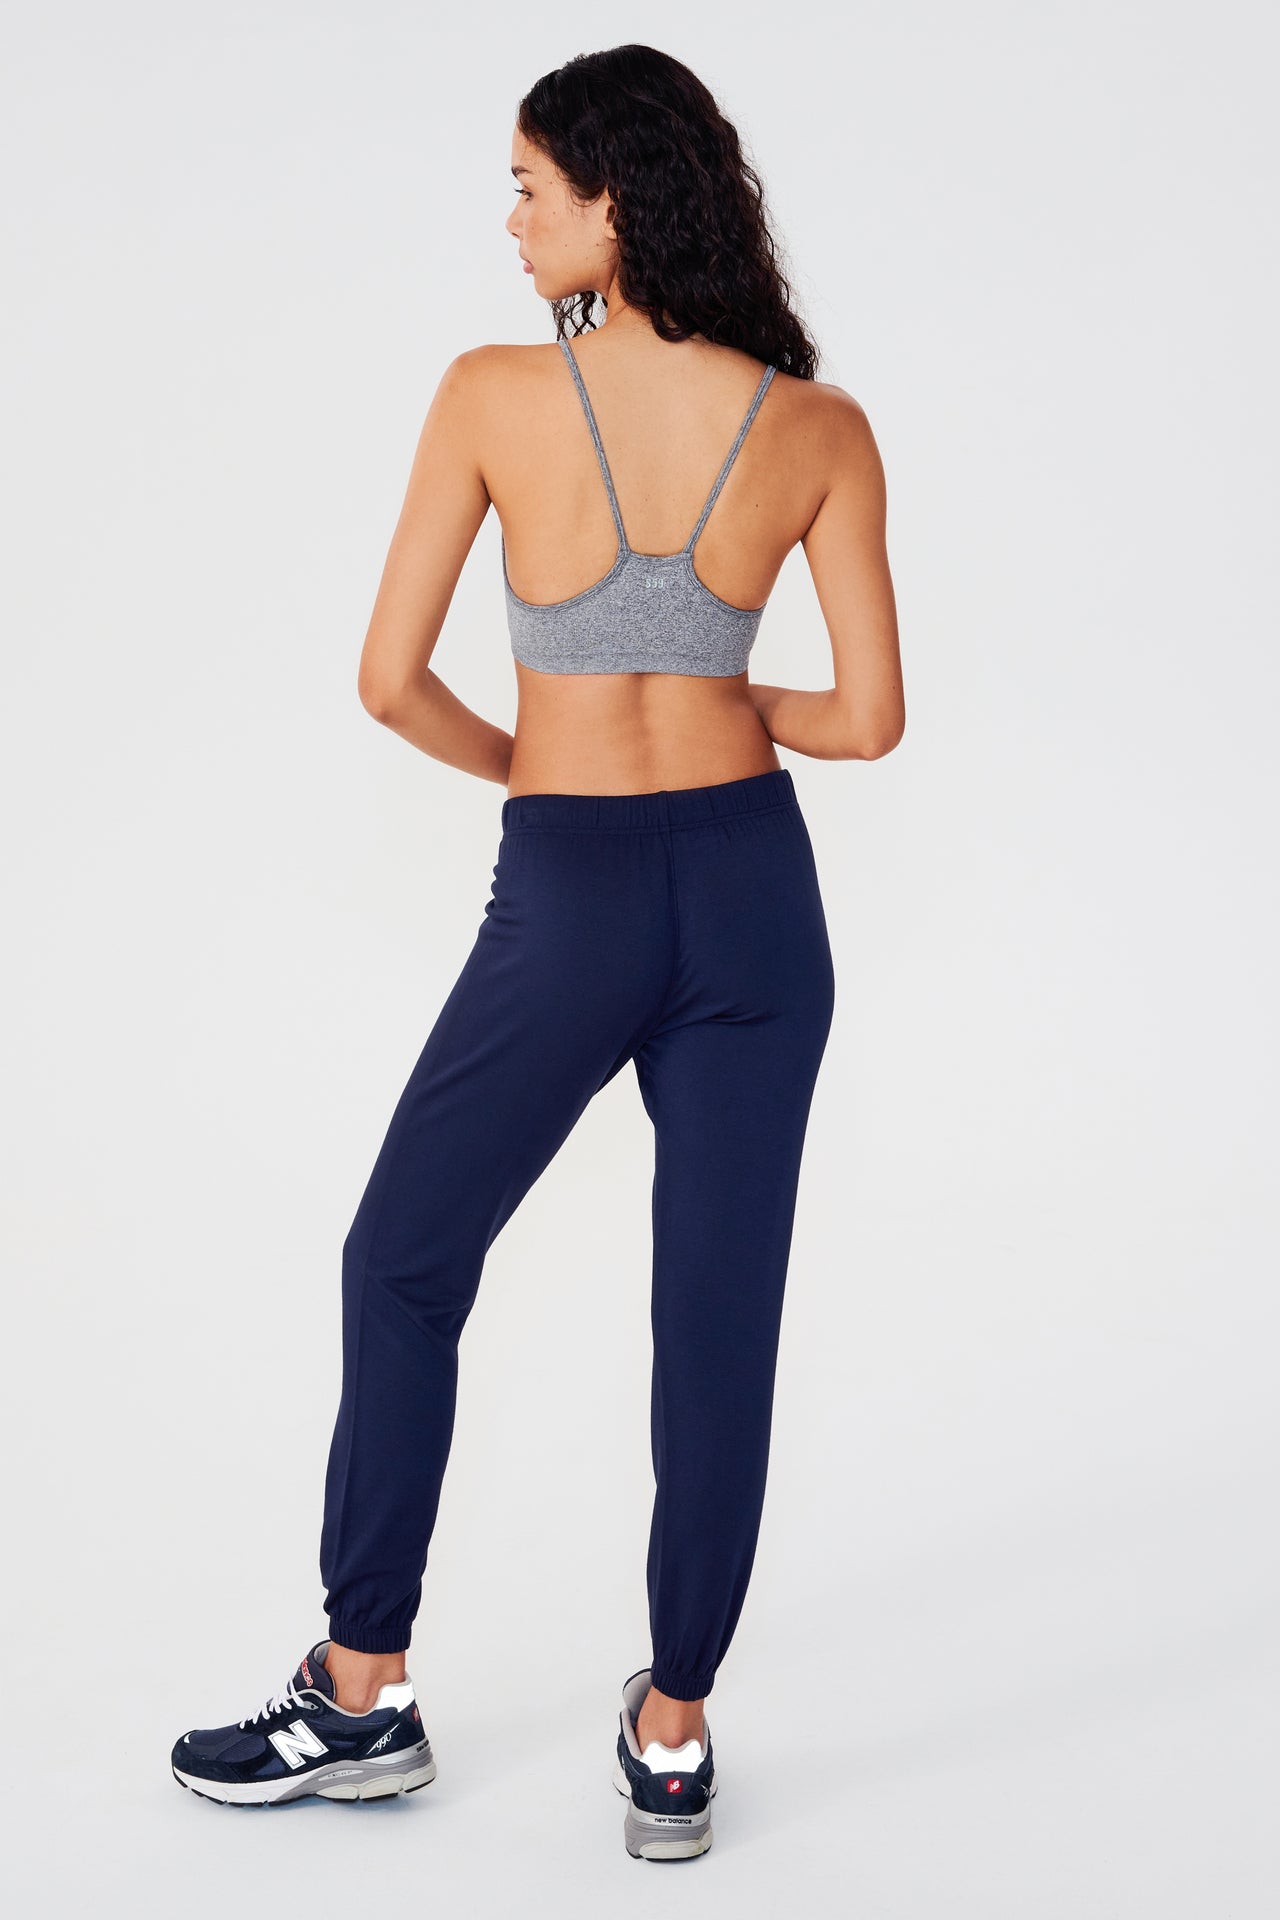 Full back view of woman with dark wavy hair wearing dark blue sweatpant jogger with white drawstring and dark grey bra with racerback spaghetti straps paired with dark blue and white shoes   